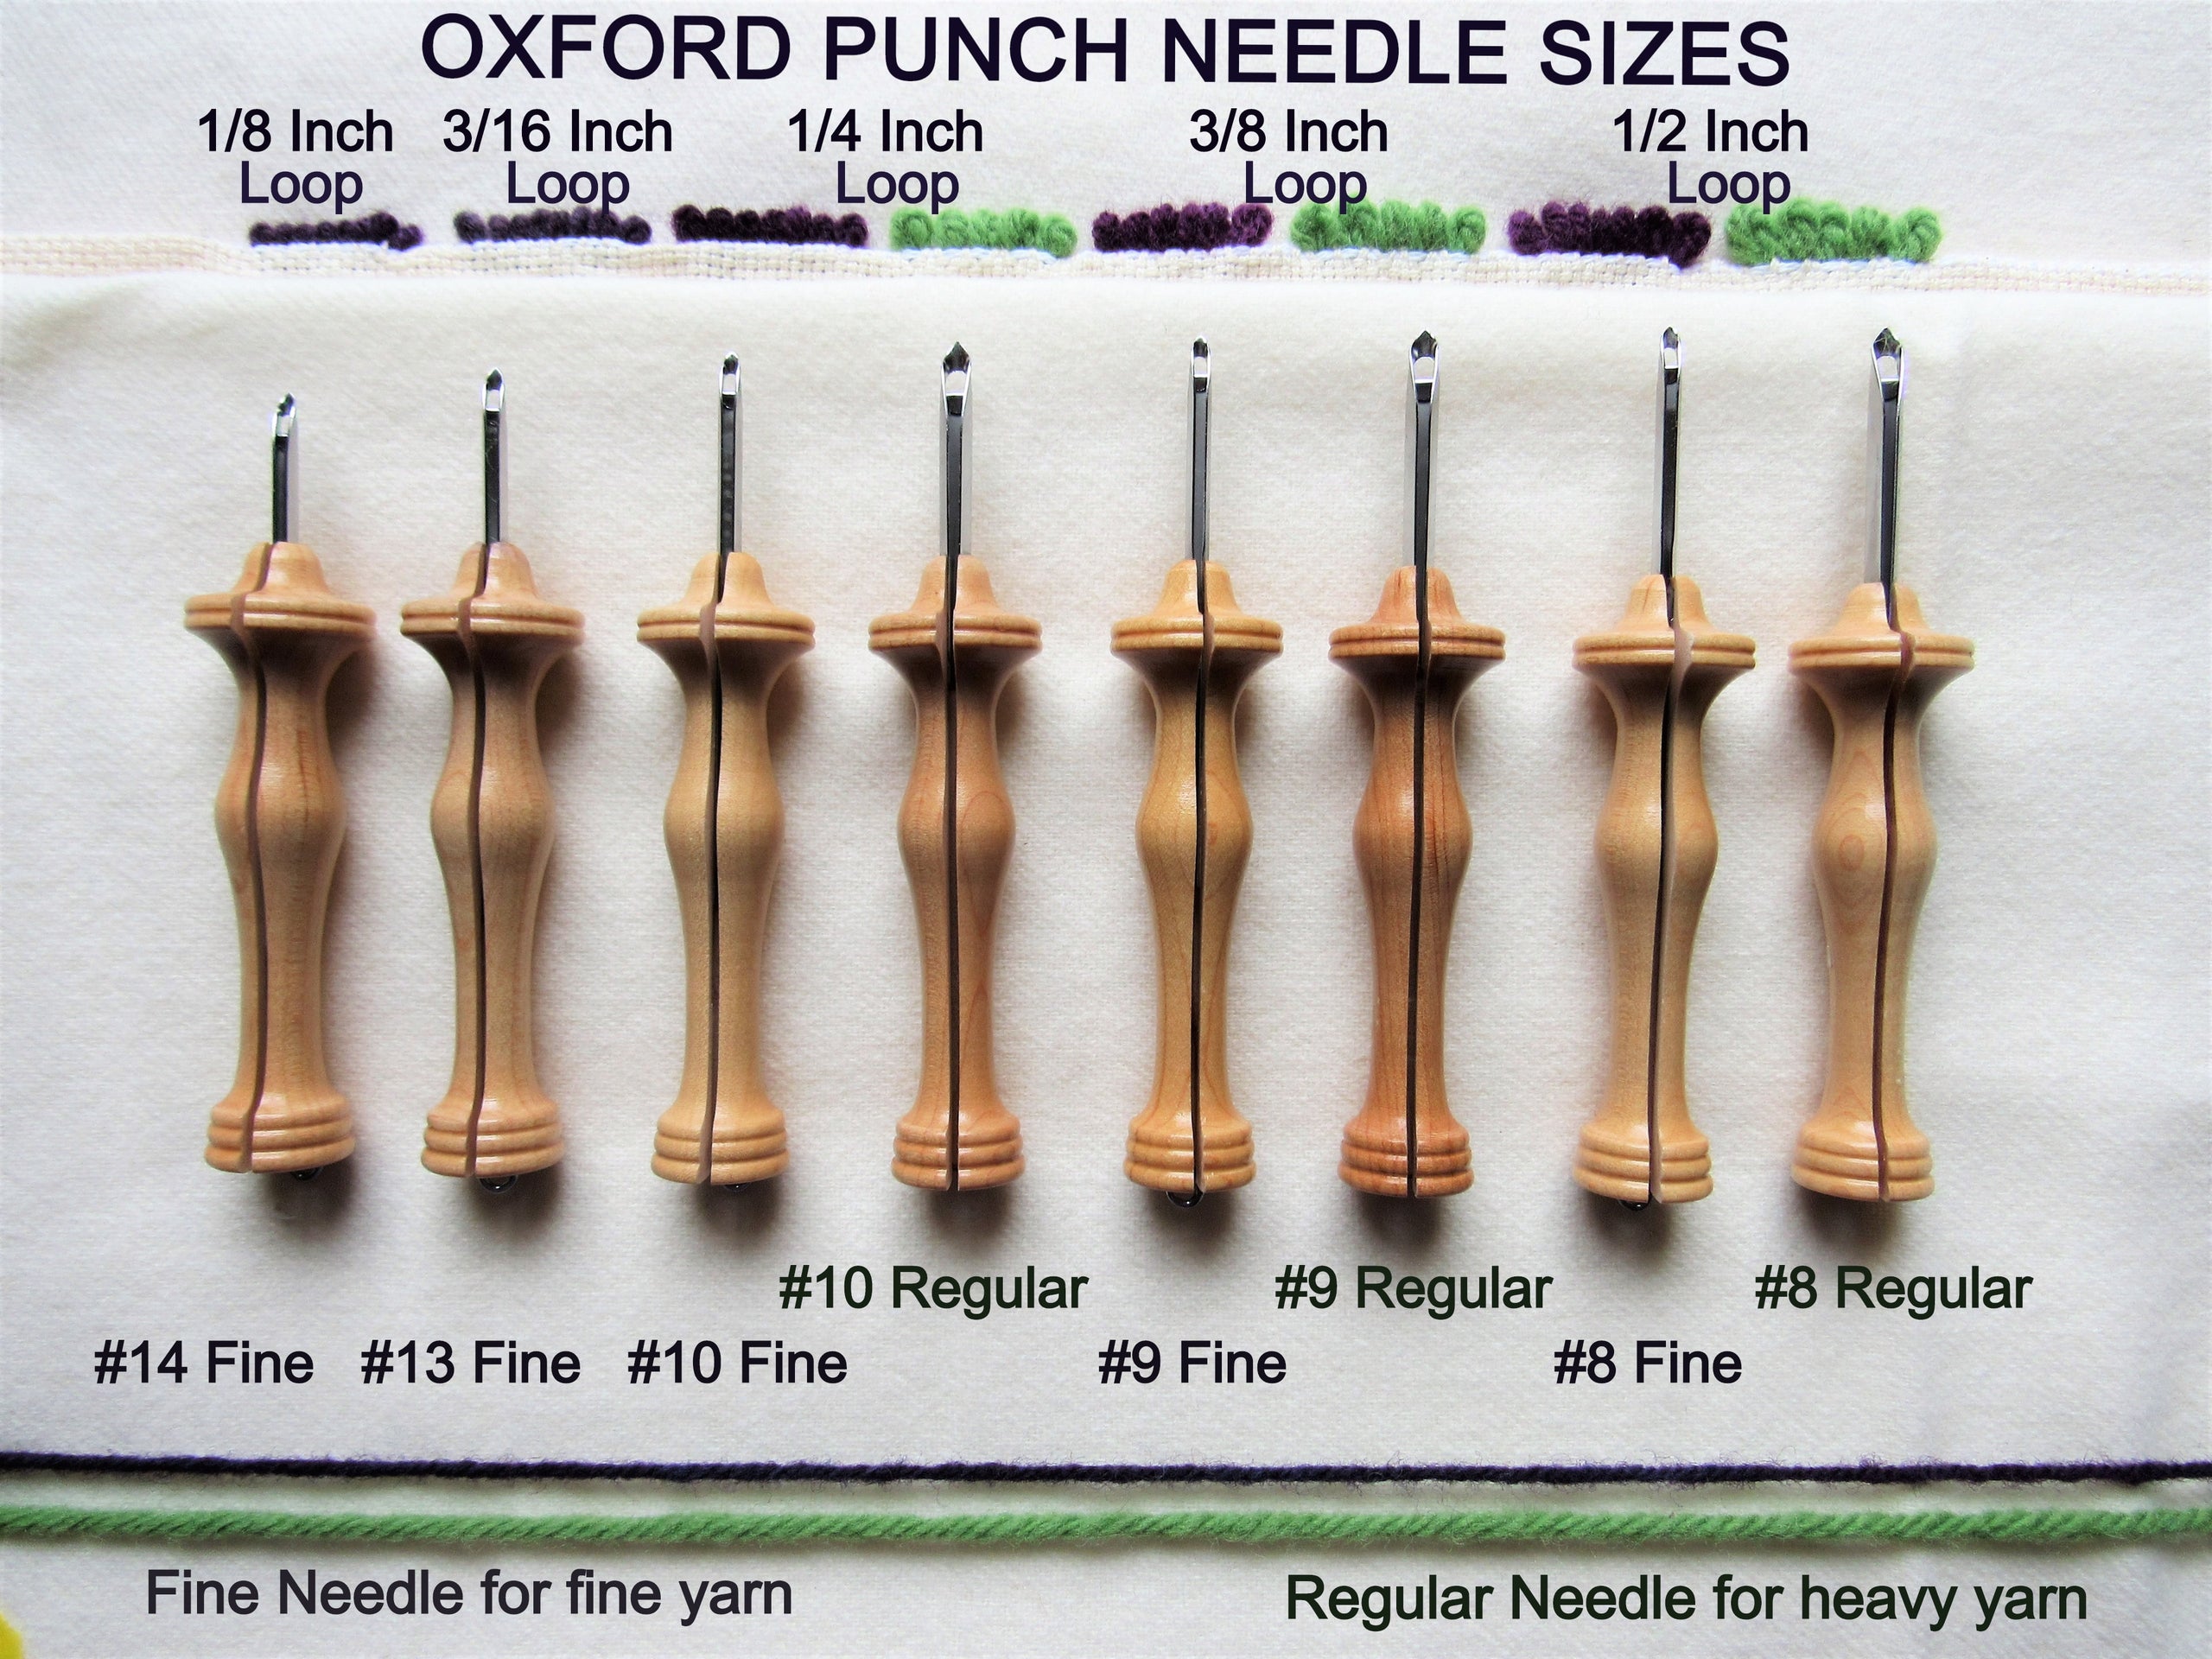 My punch needles - what do you think? : r/PunchNeedle